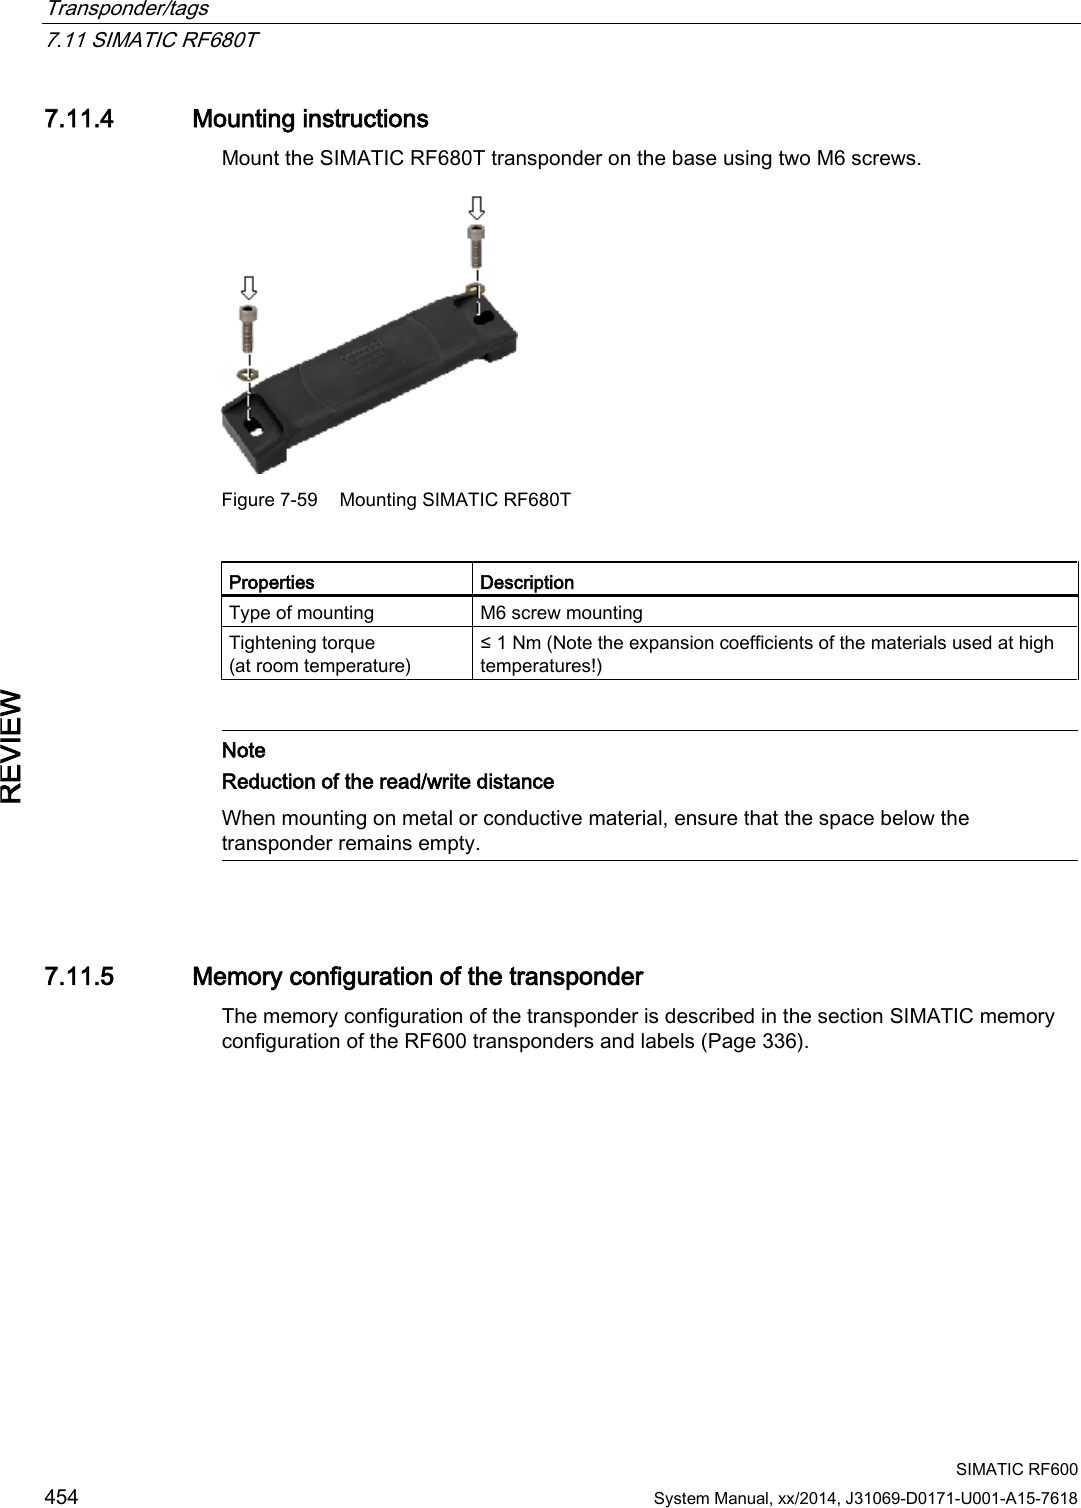 Transponder/tags   7.11 SIMATIC RF680T  SIMATIC RF600 454 System Manual, xx/2014, J31069-D0171-U001-A15-7618 REVIEW 7.11.4 Mounting instructions Mount the SIMATIC RF680T transponder on the base using two M6 screws.  Figure 7-59 Mounting SIMATIC RF680T  Properties Description Type of mounting M6 screw mounting Tightening torque (at room temperature) ≤ 1 Nm (Note the expansion coefficients of the materials used at high temperatures!)    Note Reduction of the read/write distance  When mounting on metal or conductive material, ensure that the space below the transponder remains empty.   7.11.5 Memory configuration of the transponder The memory configuration of the transponder is described in the section SIMATIC memory configuration of the RF600 transponders and labels (Page 336). 